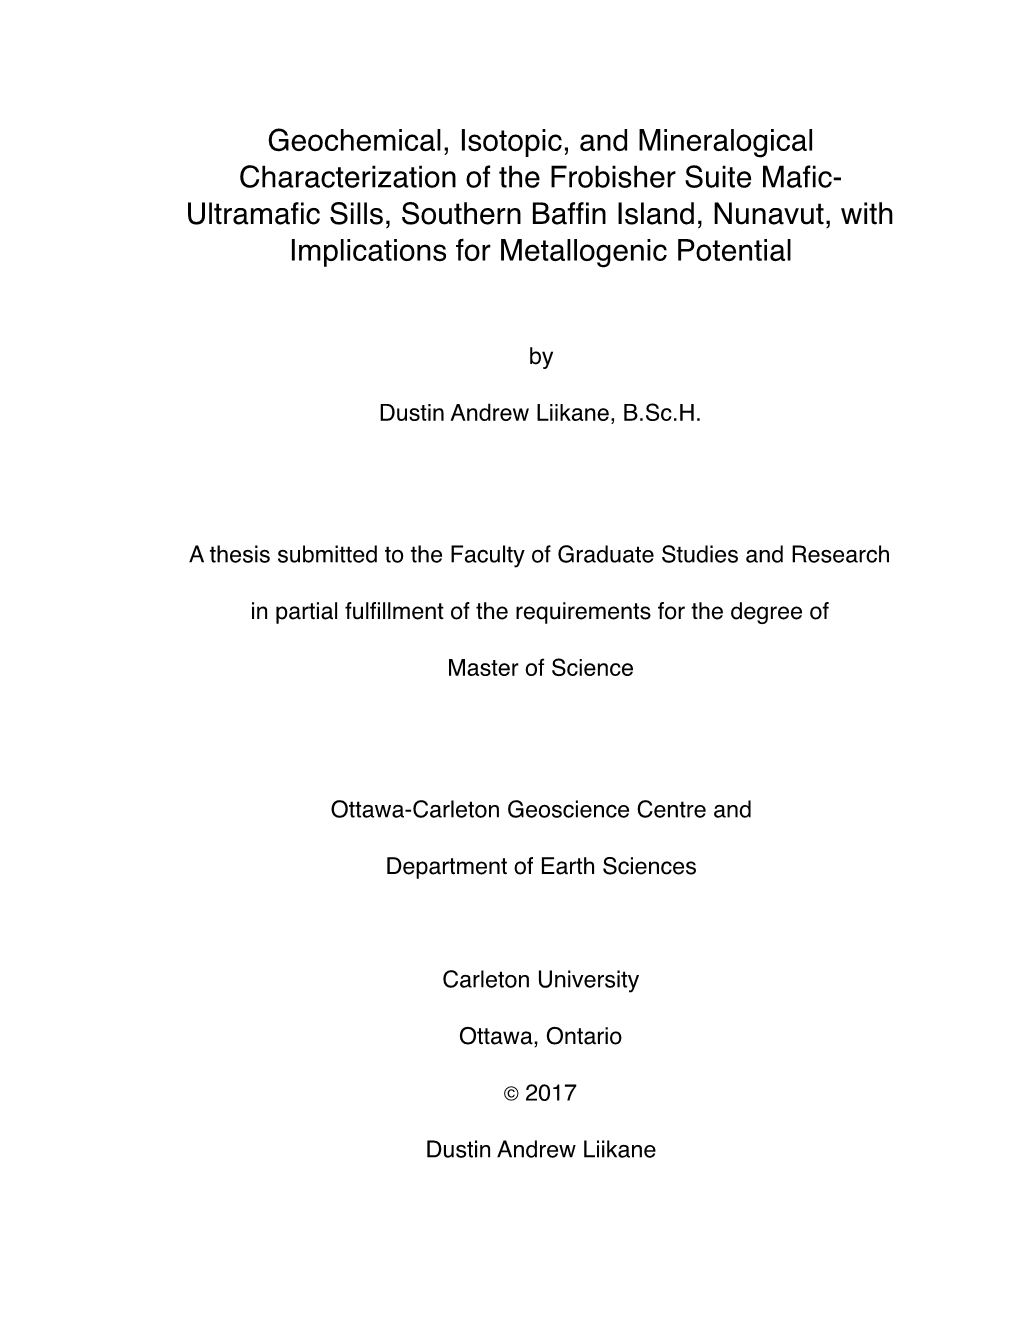 Geochemical, Isotopic, and Mineralogical Characterization of the Frobisher Suite Mafic